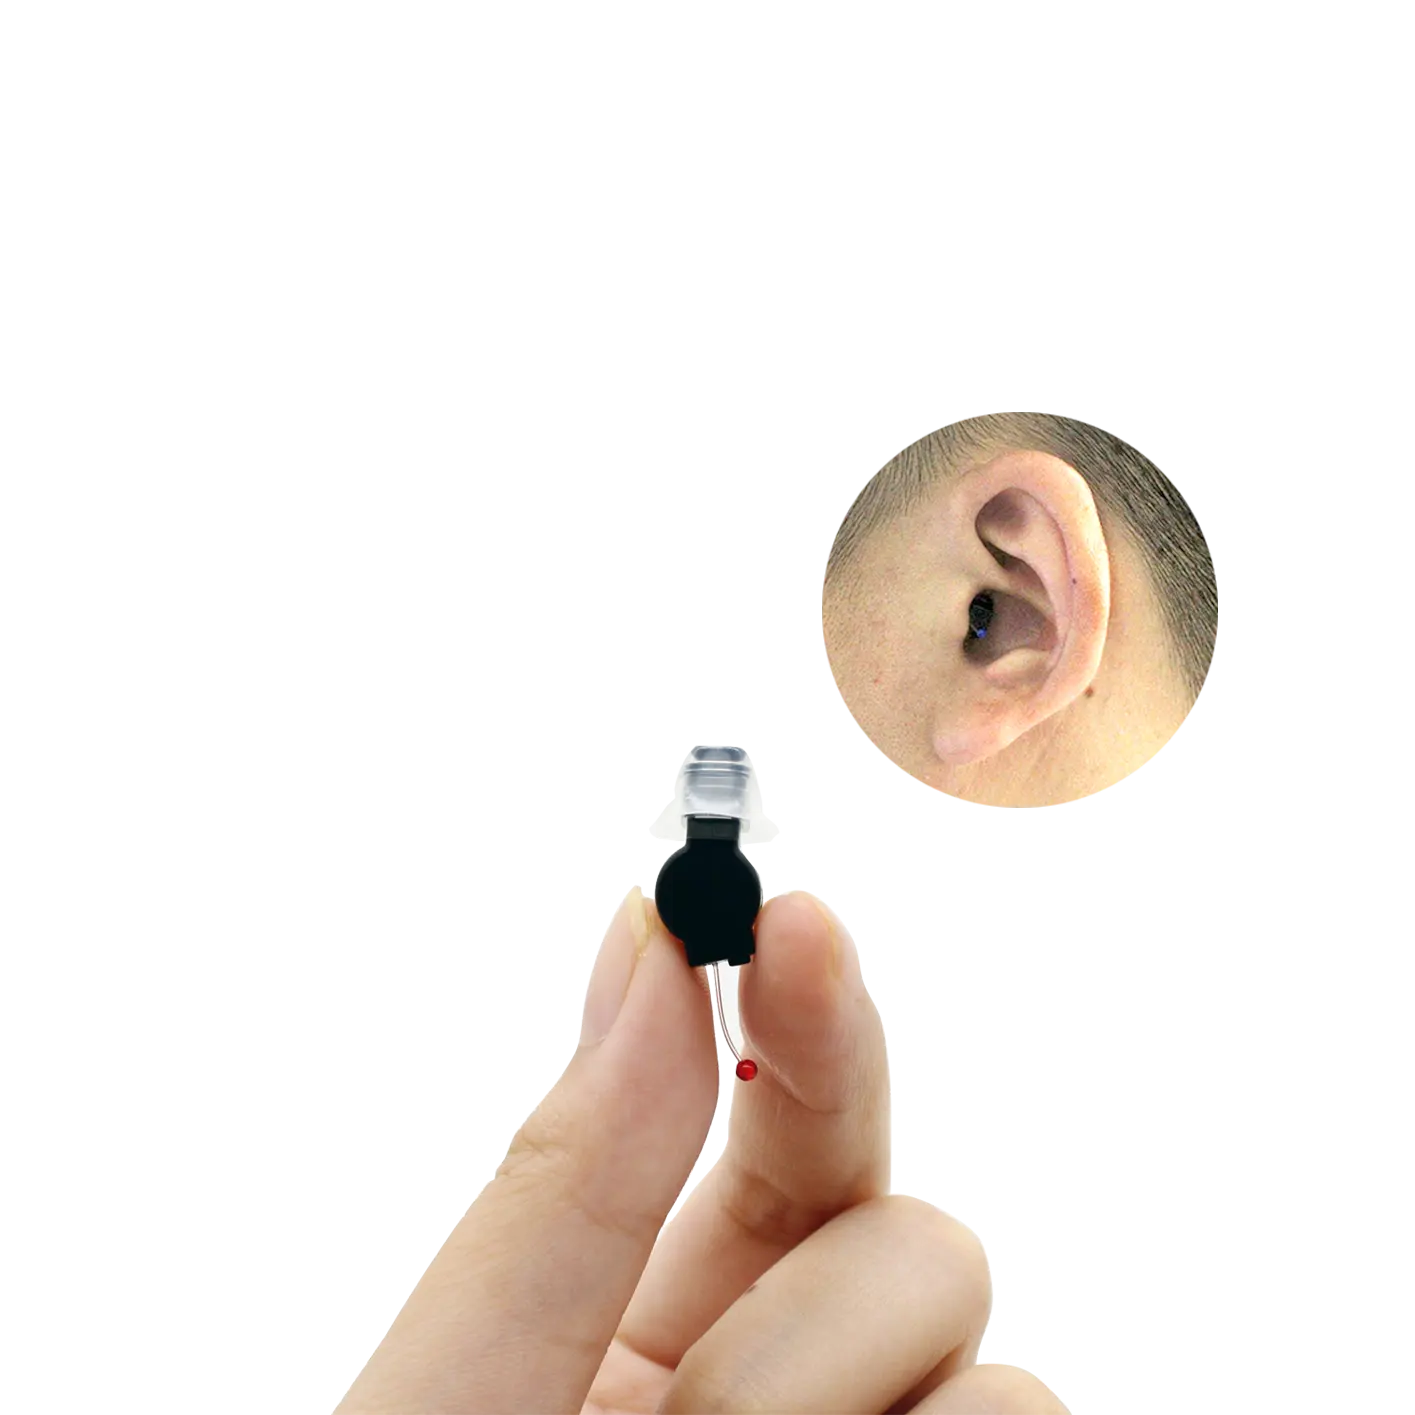 2021 Retone China New Products Super Small Invisible Mini Rechargeable CIC Ear Hearing Aid for Deafness